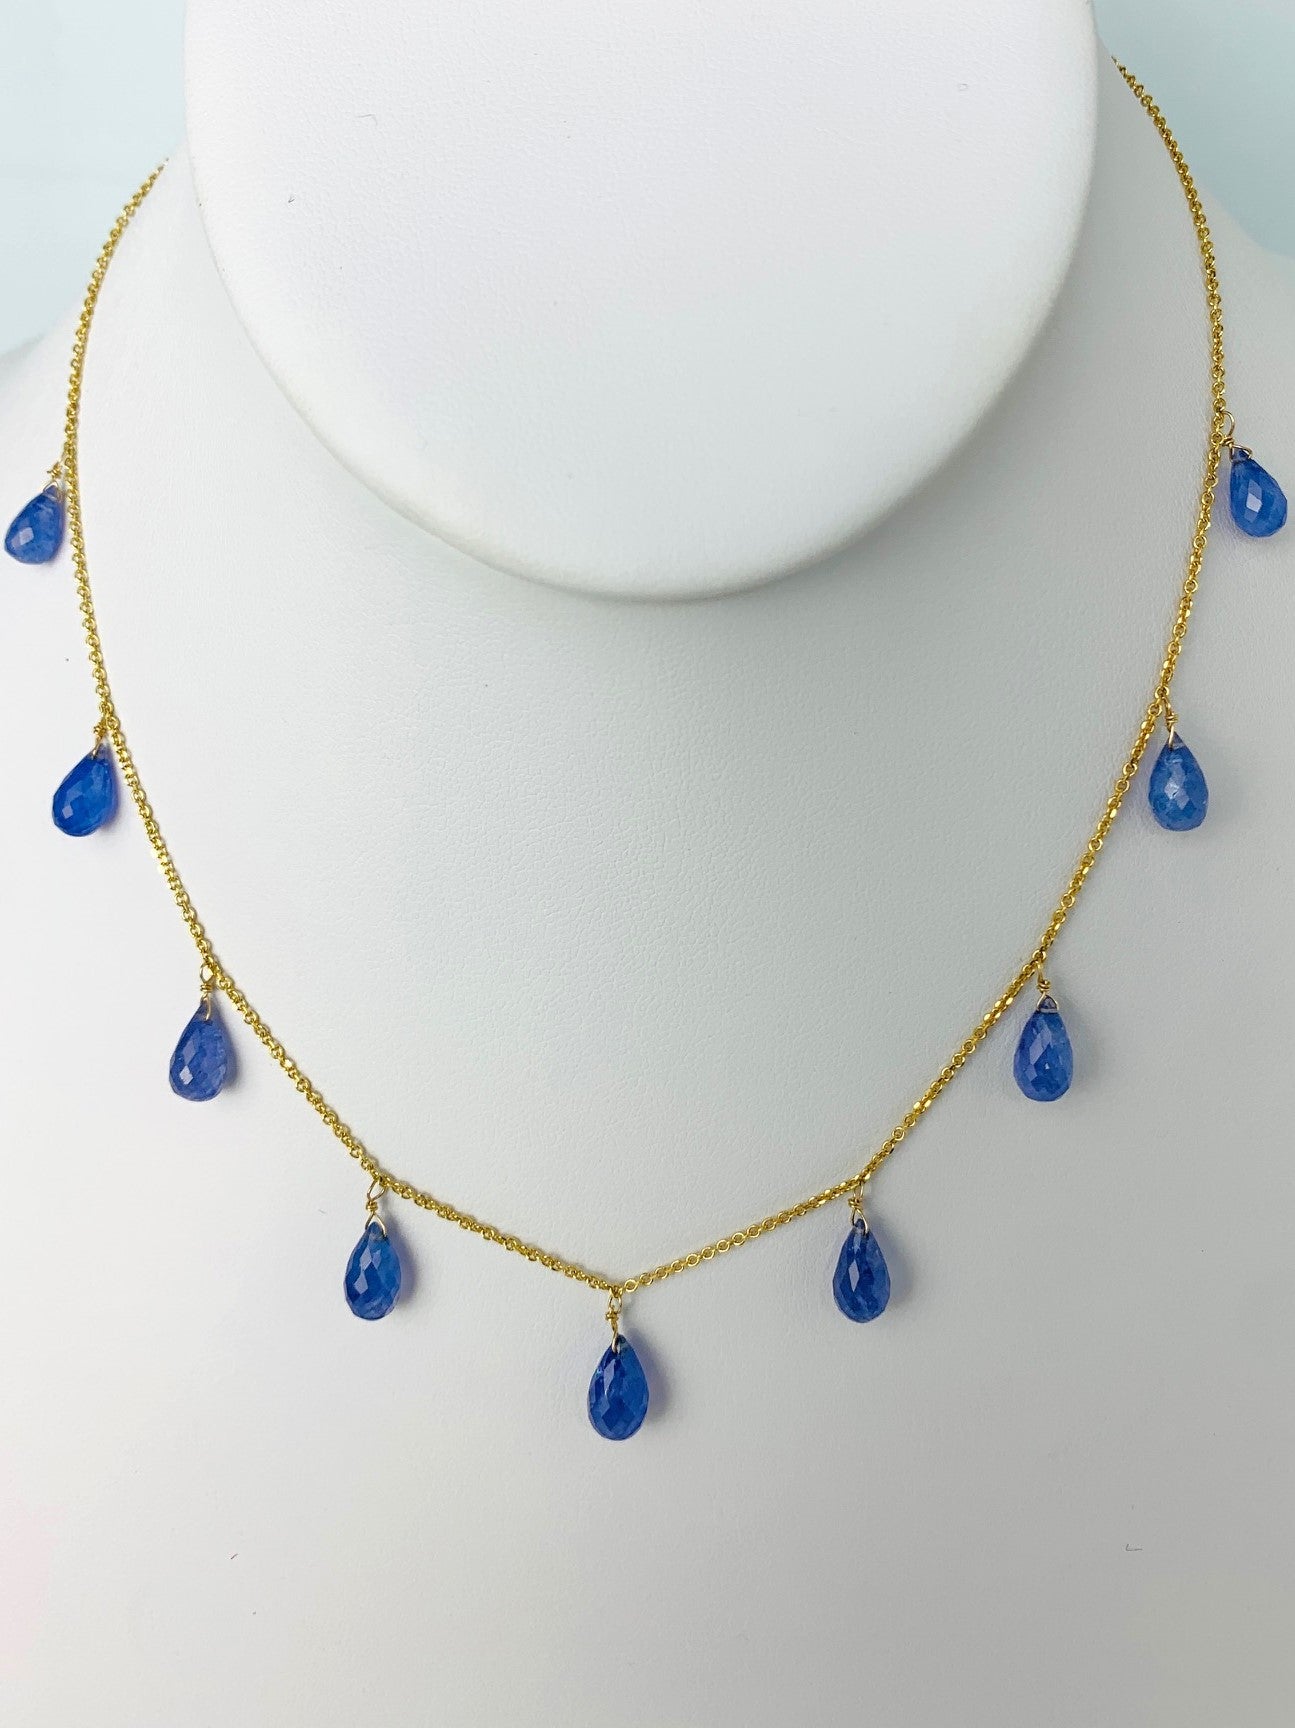 16" Tanzanite 9 Station Dangly Necklace in 18KY - NCK-585-DNGGM18Y-TANZ-16